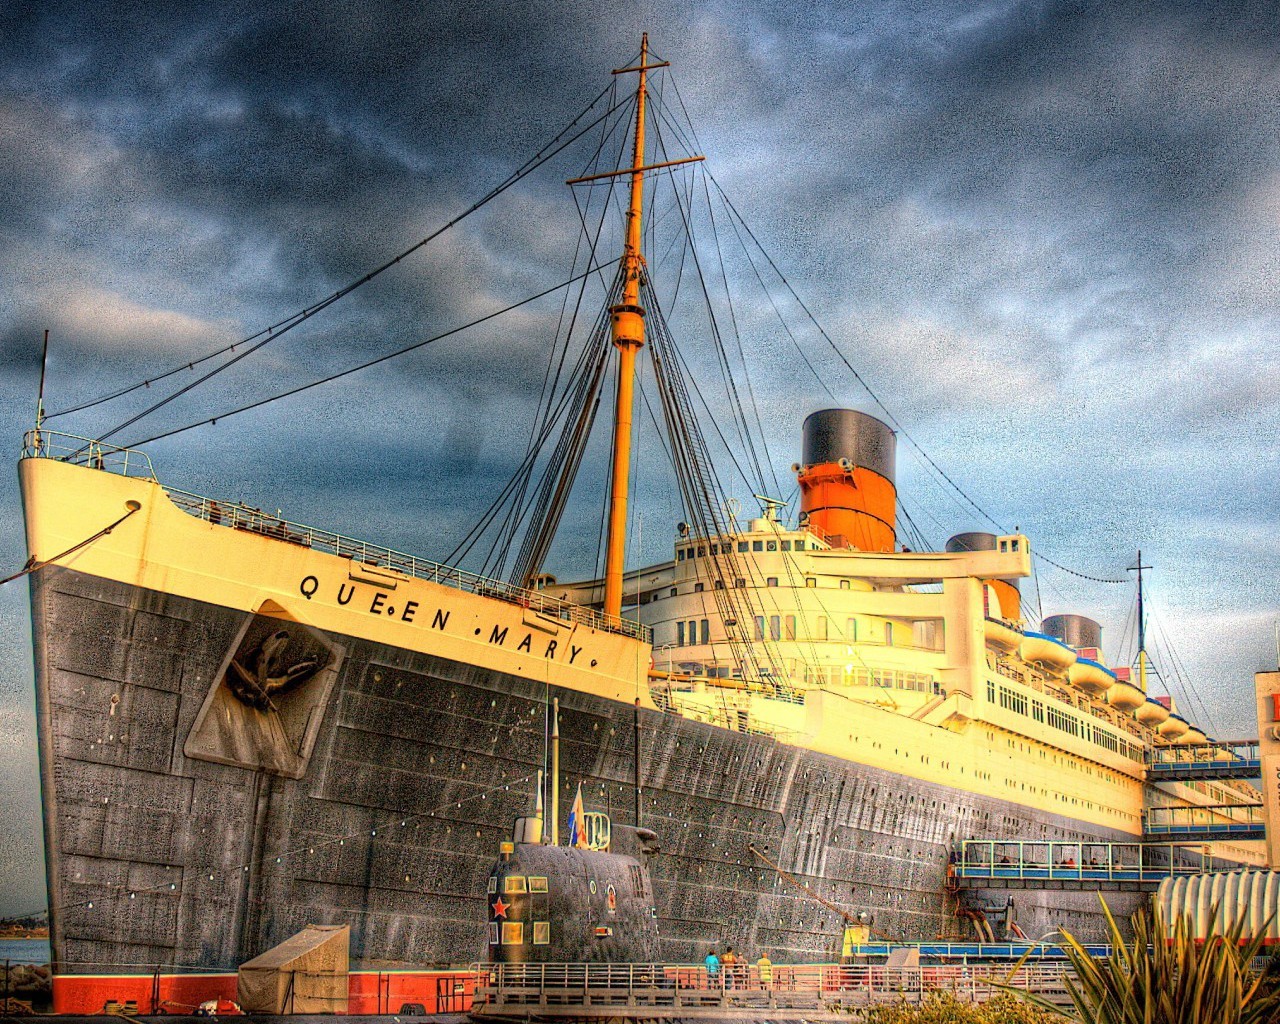 General 1280x1024 cruise ship vehicle HDR ship Queen Mary